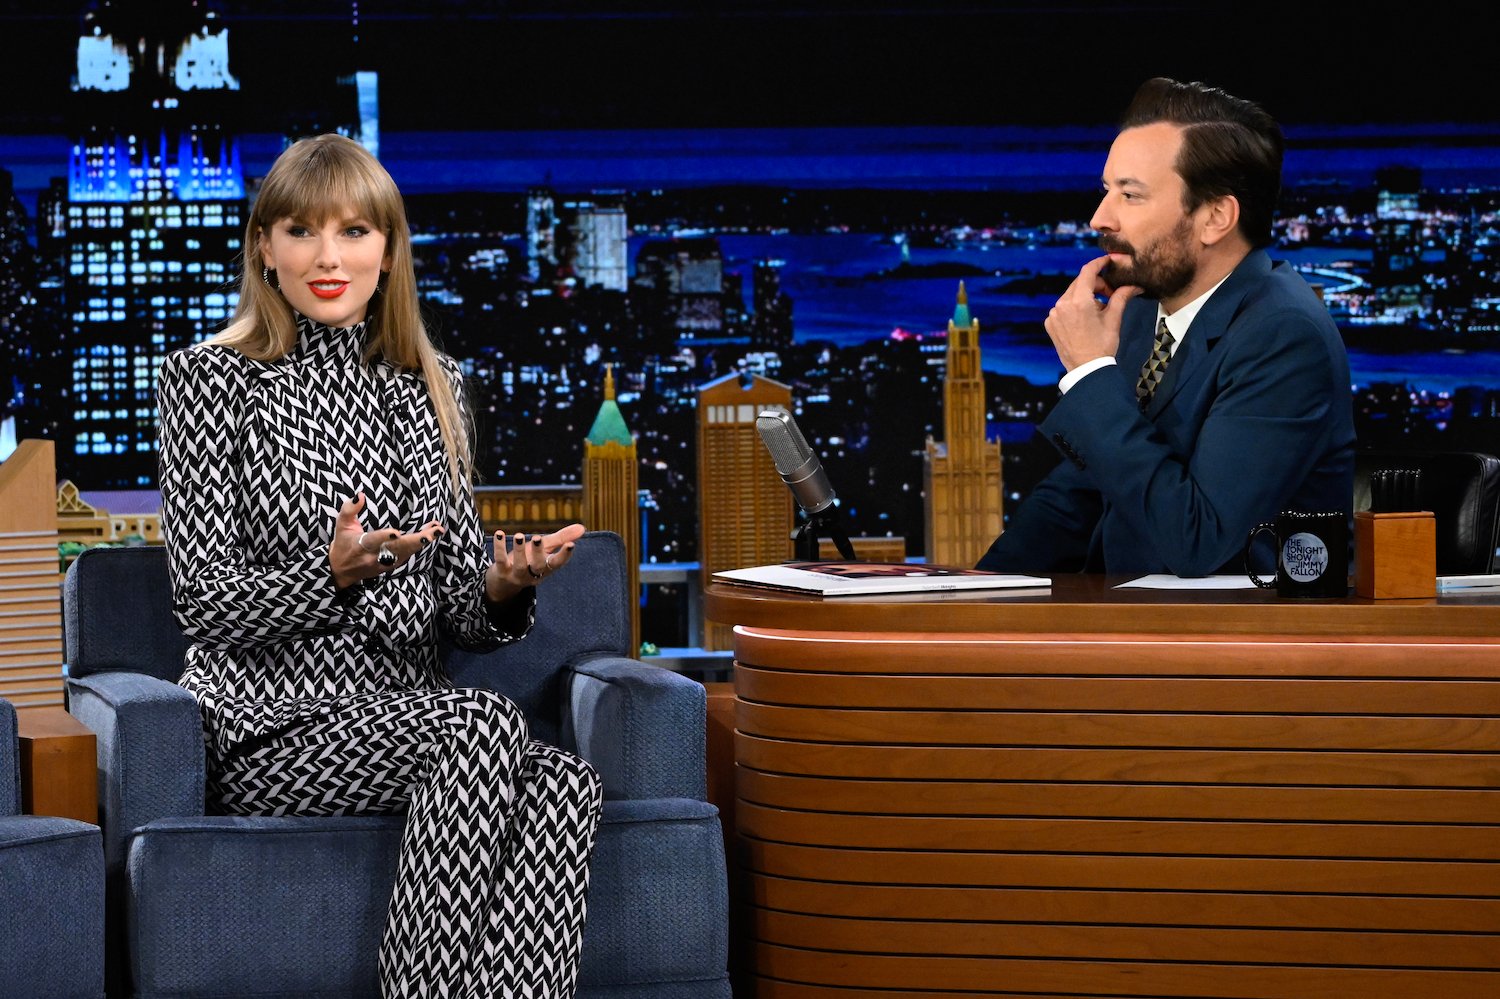 Taylor Swift during an interview with host Jimmy Fallon on 'The Tonight Show Starring Jimmy Fallon'